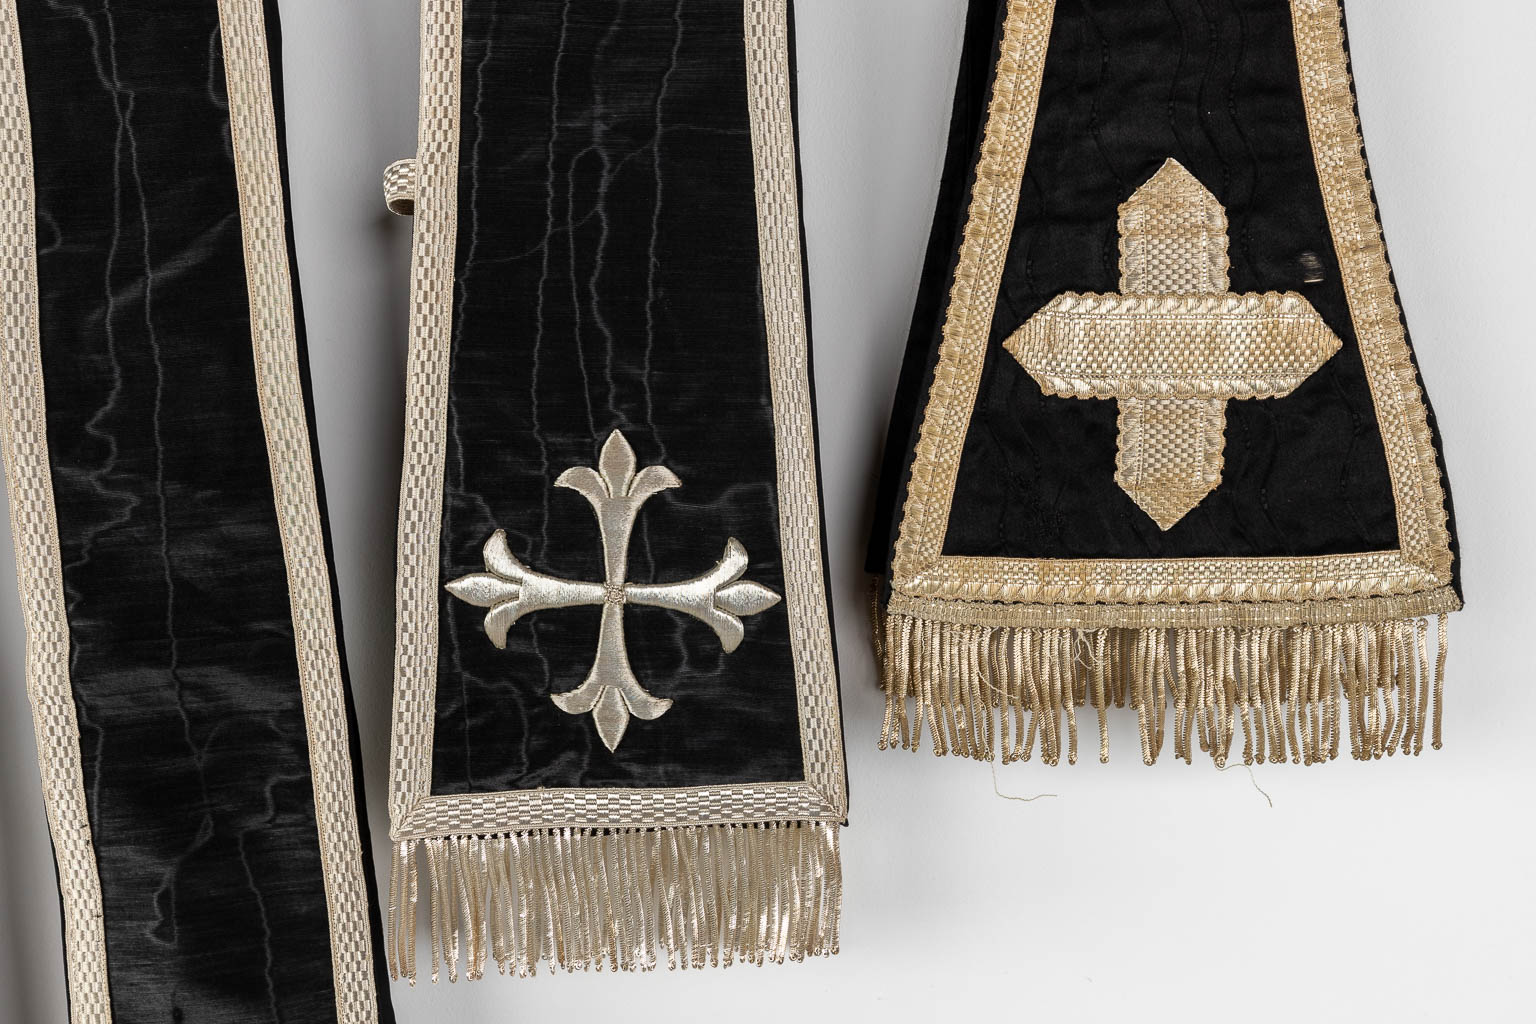 Two Roman Chasubles, Stola and Chalice veil, thick gold thread embroideries.